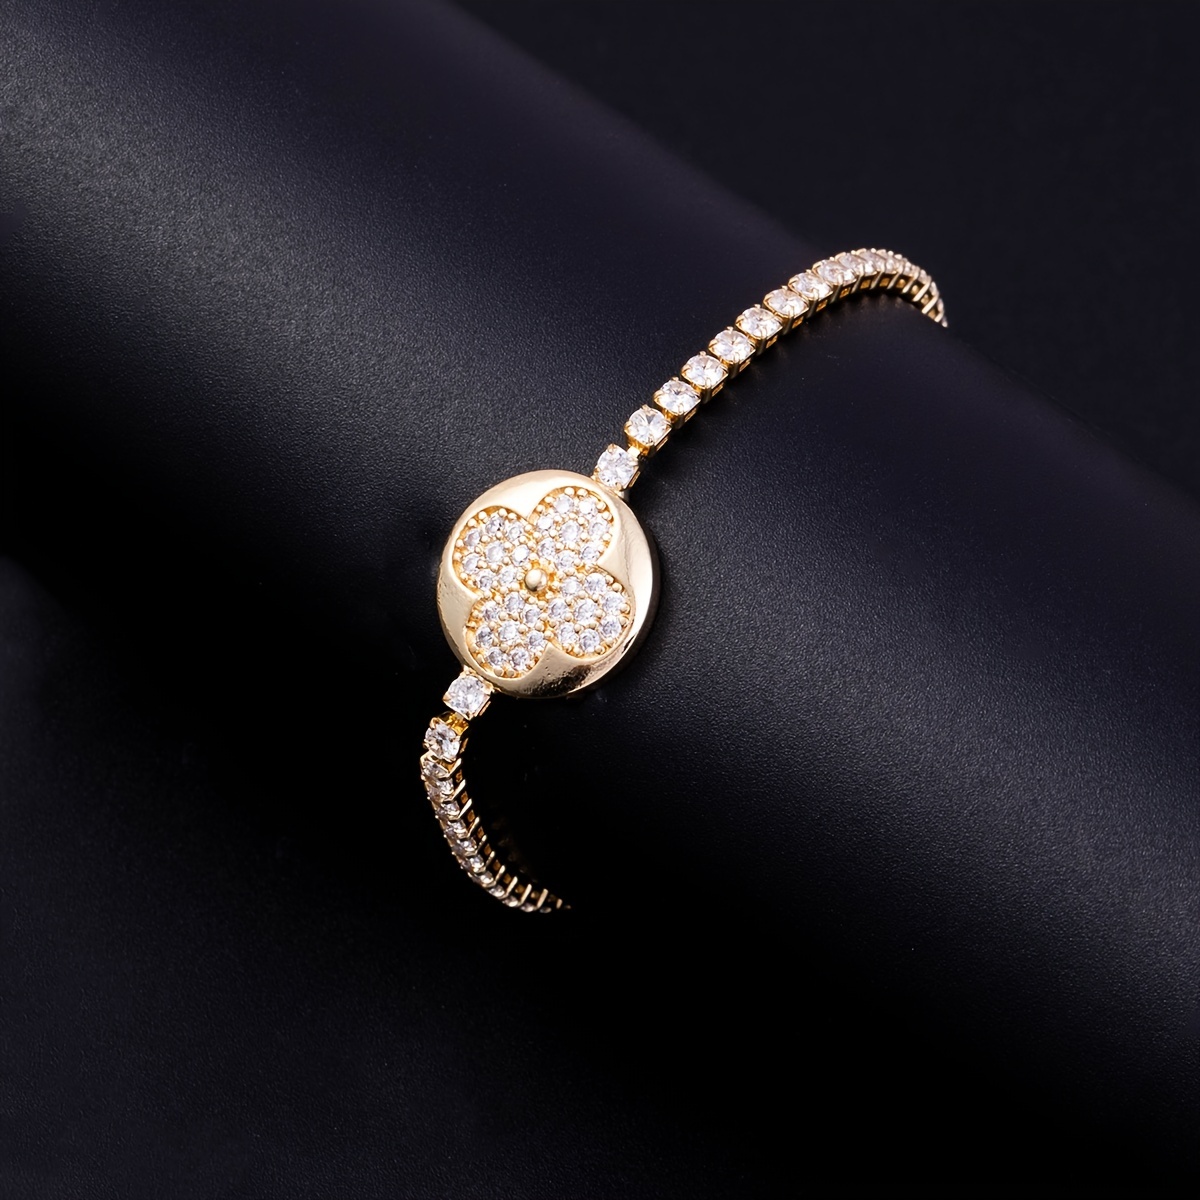 Buy 1PC Four Leaf Clover Bracelet Four Leaf Lucky Bracelets Rose Gold  Jewellery With Rhinestones For Women(White+Rose Gold) Online at Low Prices  in India